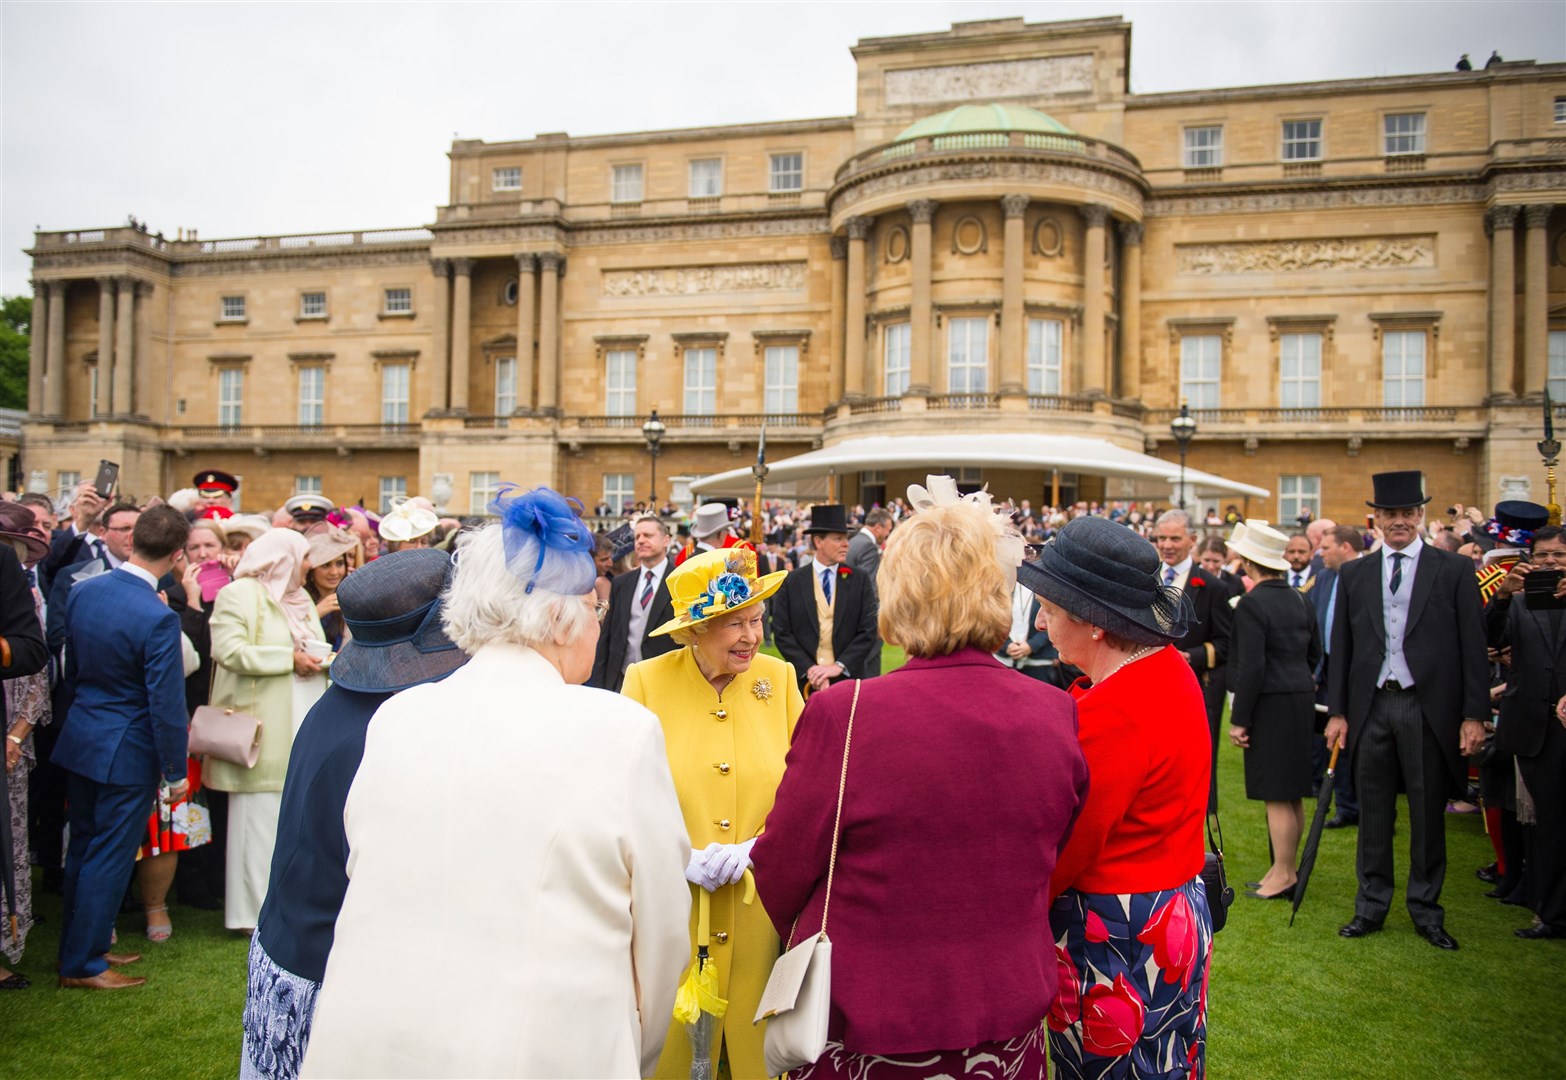 The Queen greeting guests during a garden party at Buckingham Palace (PA)